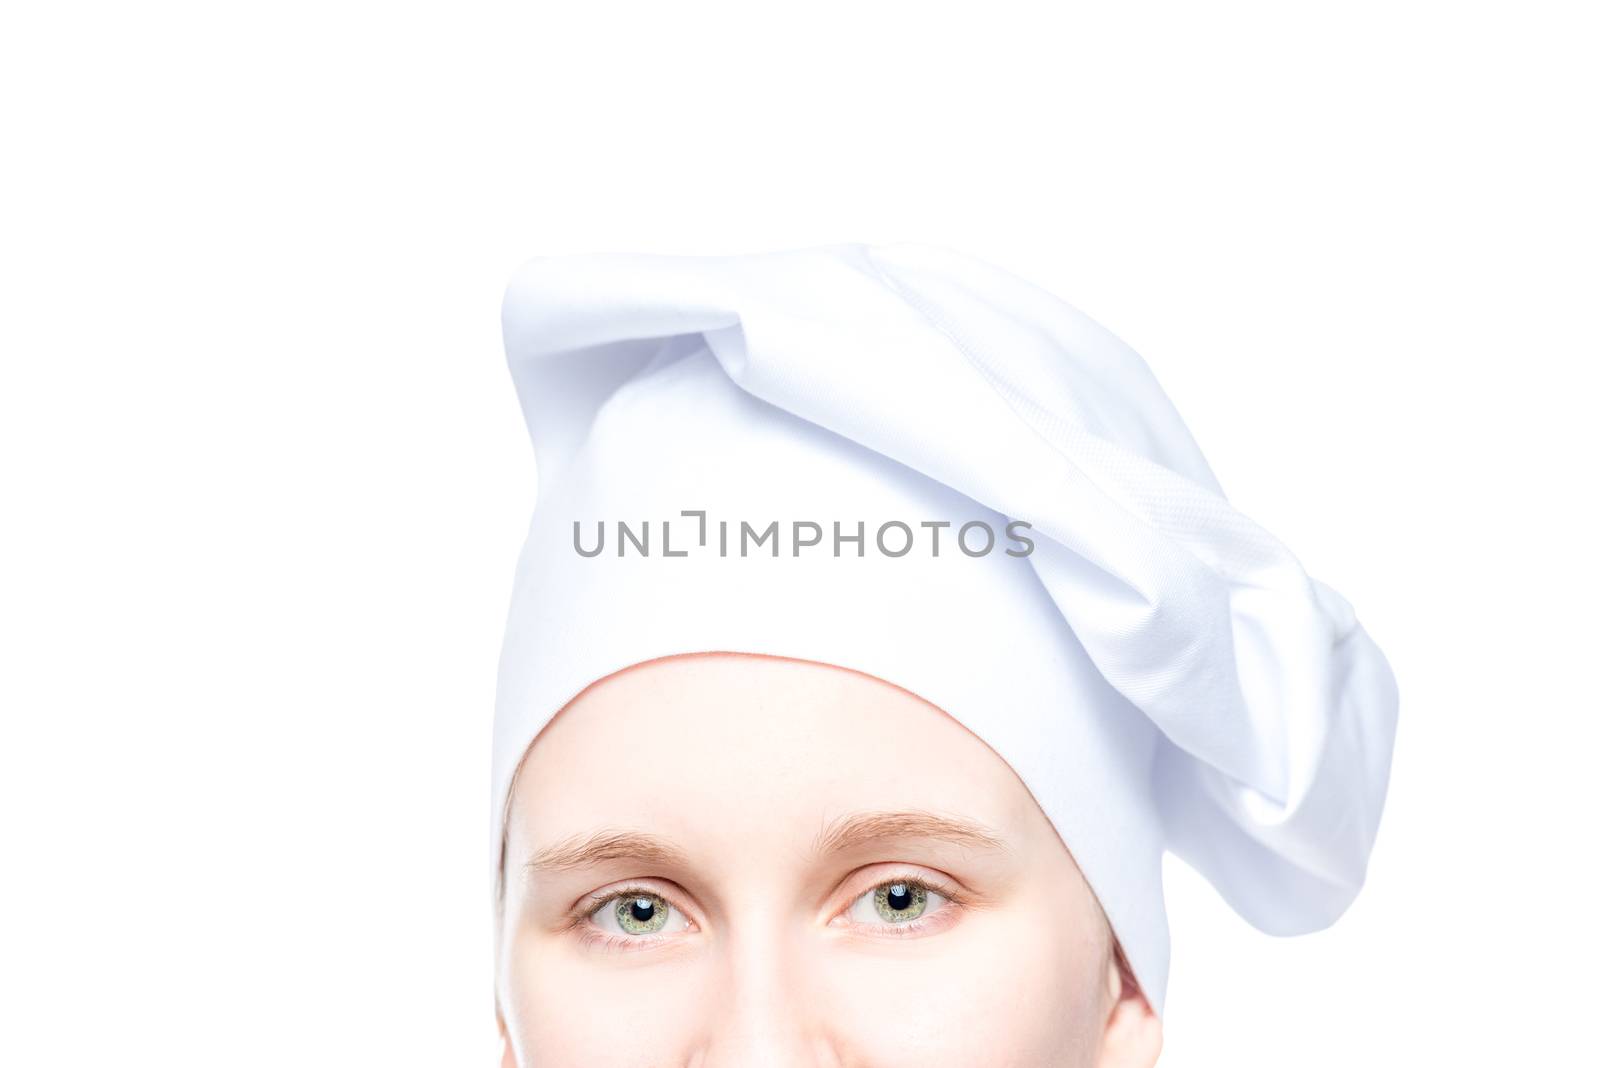 female chef's eyes with hat close up on white background by kosmsos111